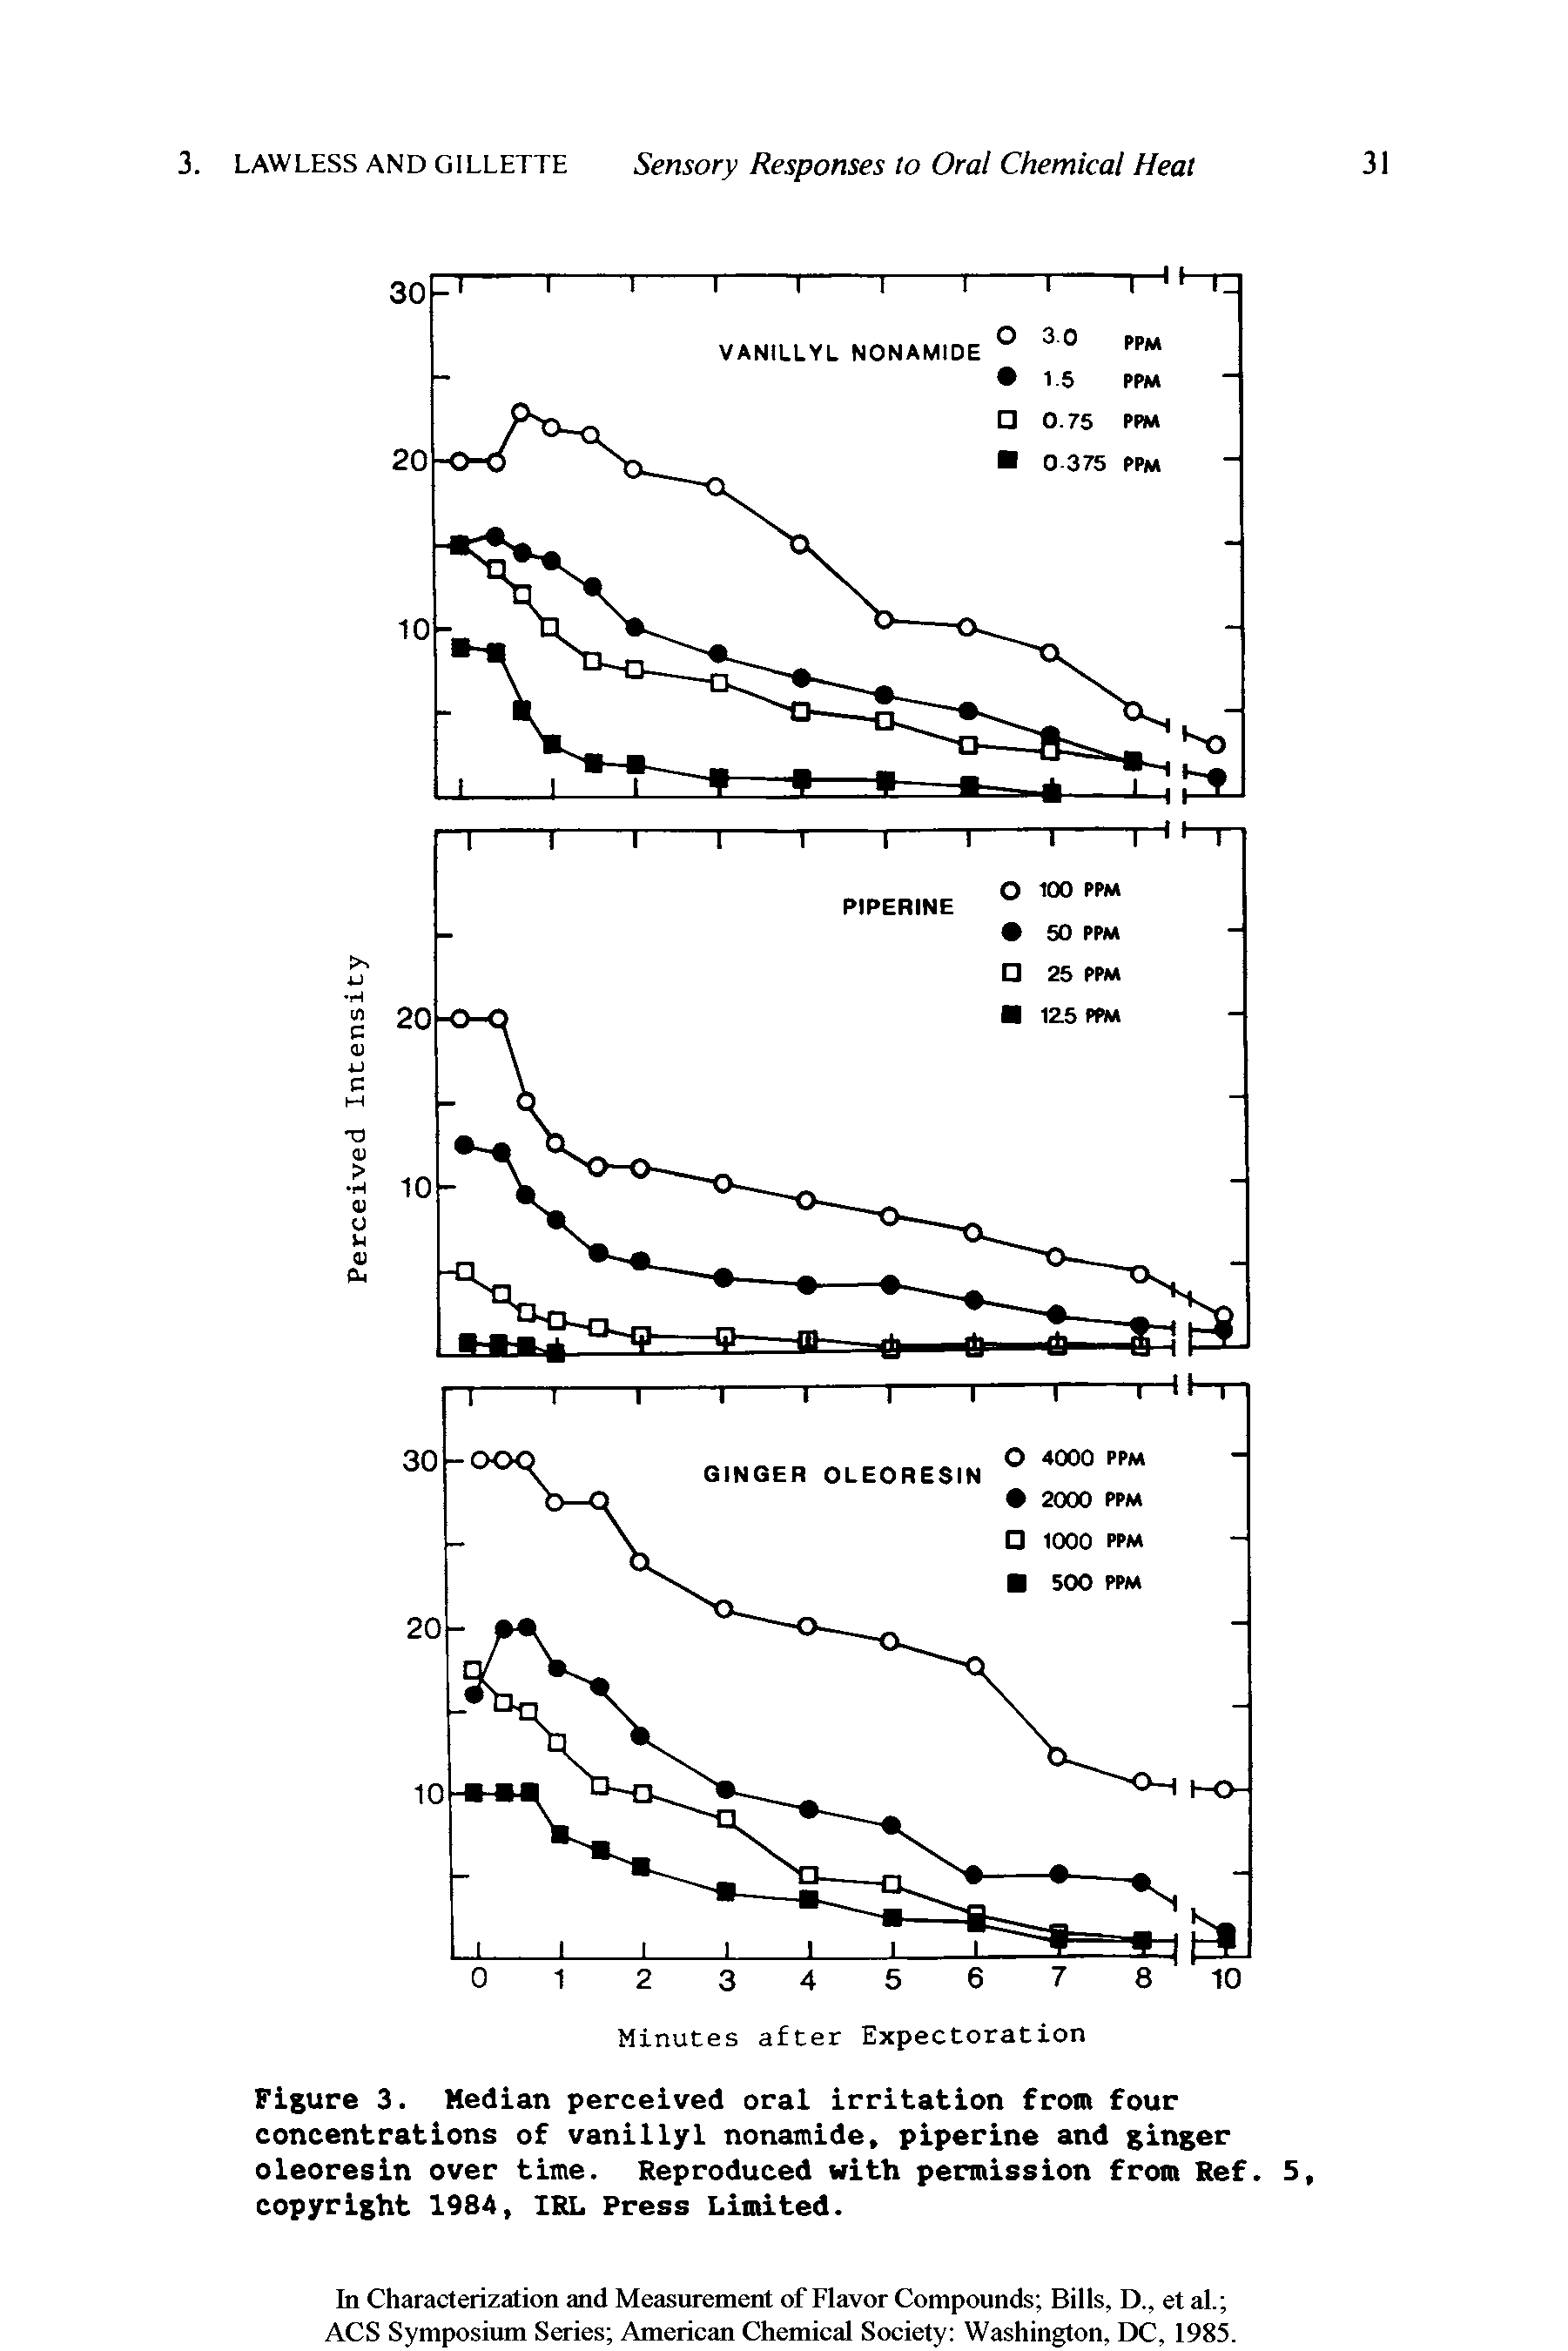 Figure 3. Median perceived oral irritation from four concentrations of vanillyl nonamide, piperine and ginger oleoresin over time. Reproduced with permission from Ref. 5, copyright 1984, IRL Press Limited.